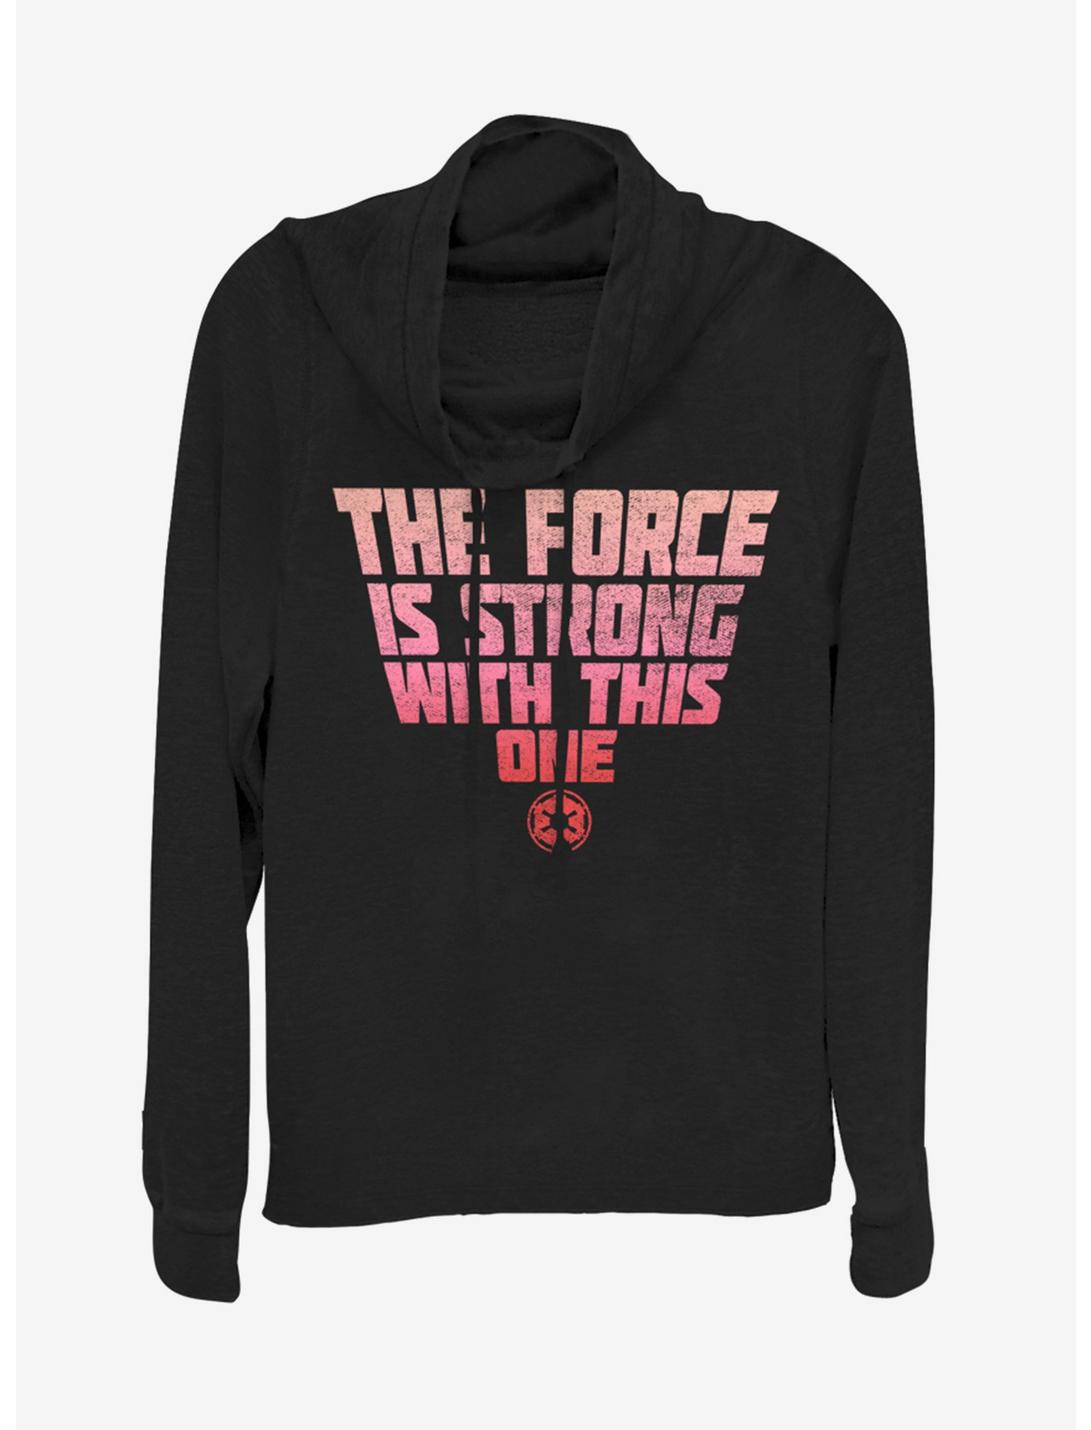 Star Wars Strong Force Cowlneck Long-Sleeve Womens Top, BLACK, hi-res